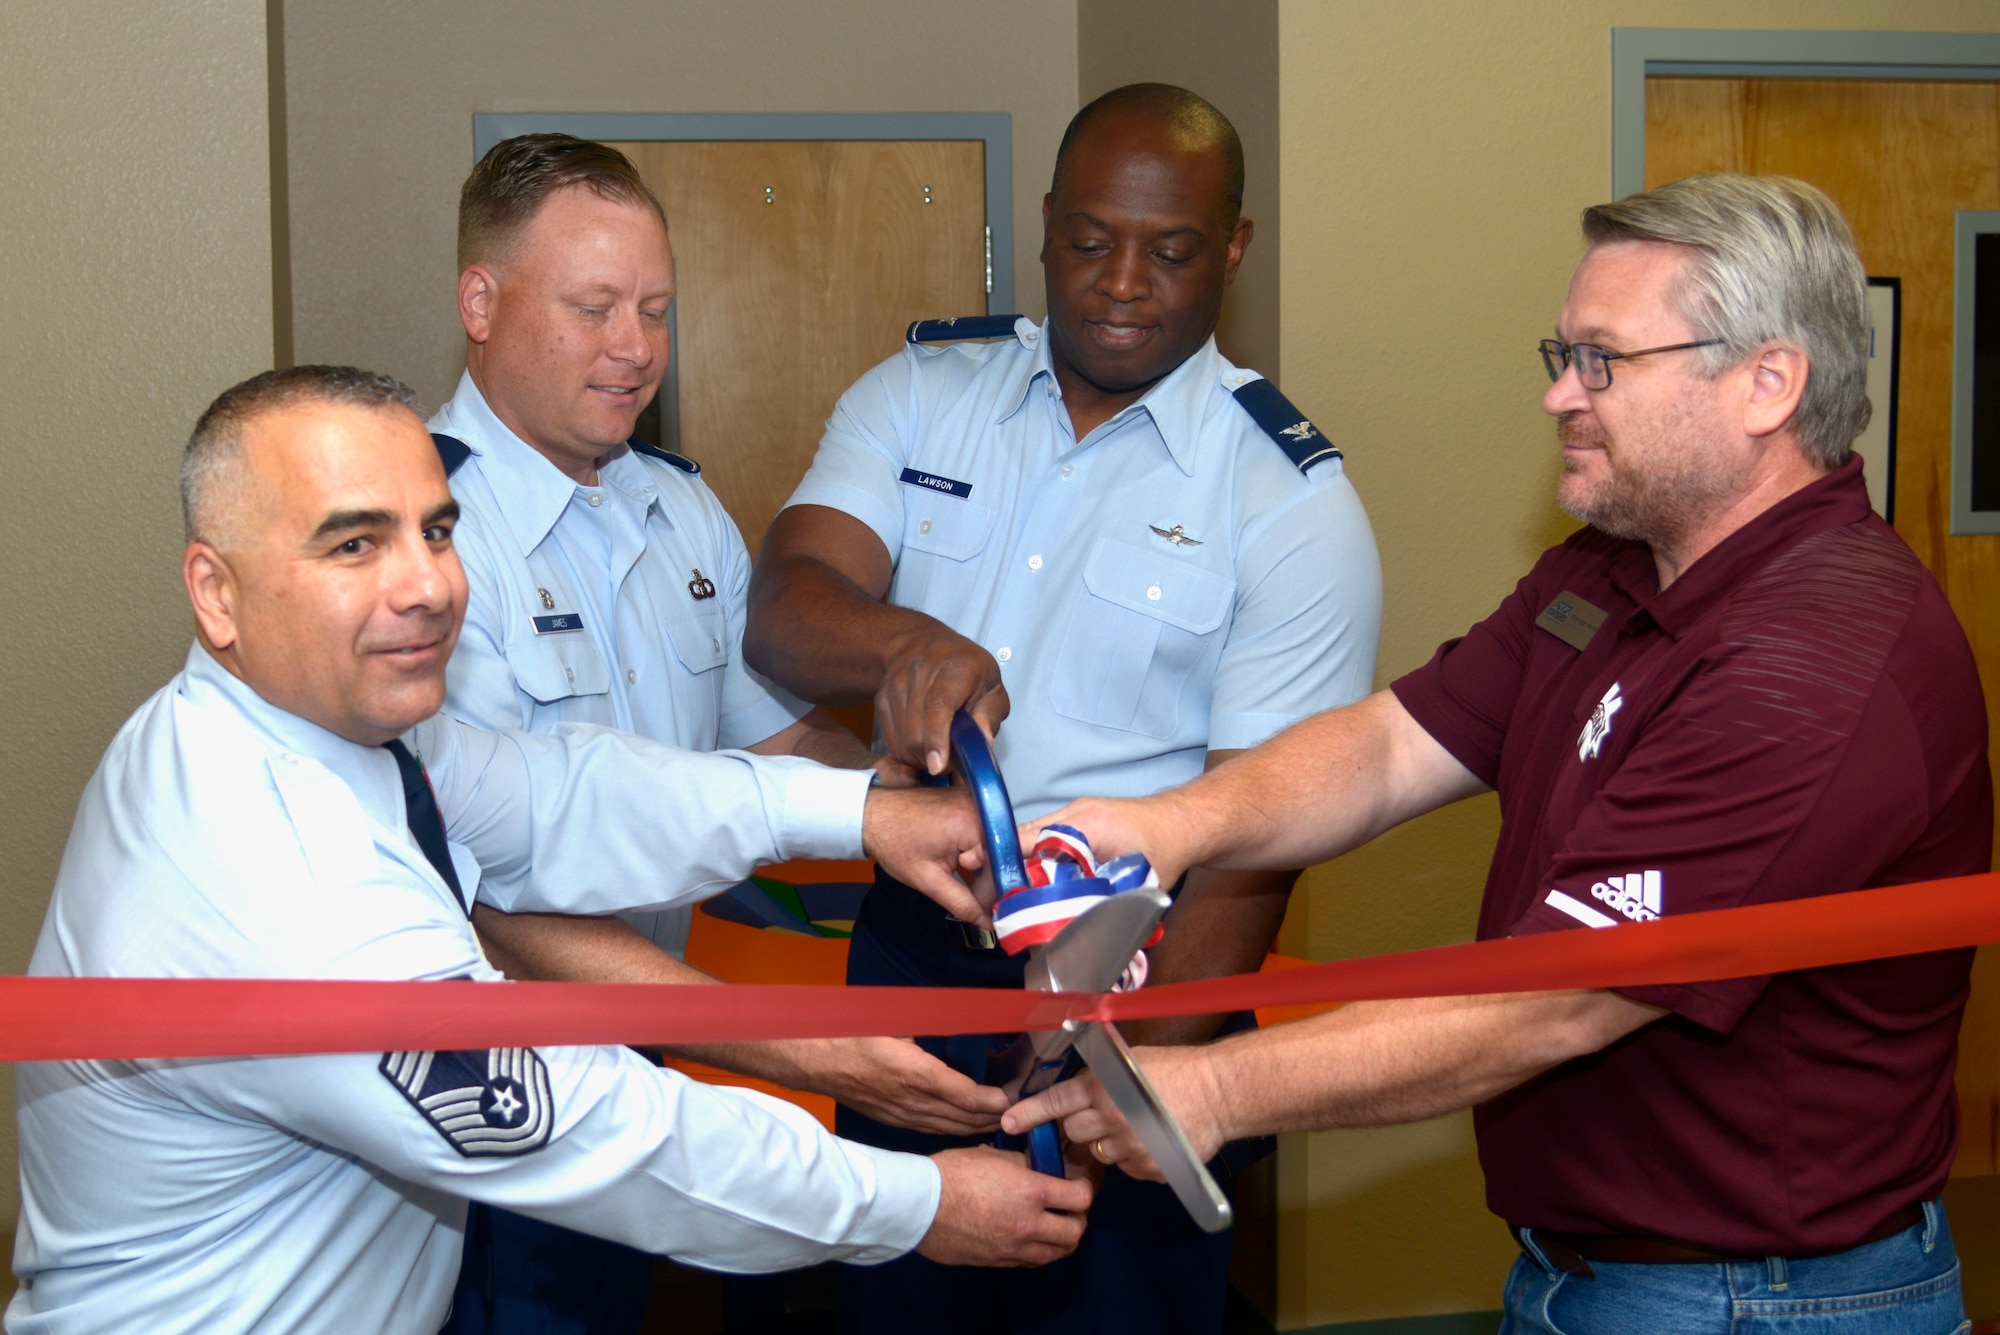 U.S. Air Force Col. Leo Lawson Jr., previous 81st Training Group commander, cuts a ribbon with 334th Training Squadron leadership at Cody Hall, on Keesler Air Force Base, Mississippi, June 28, 2019. The 334th TRS incorporated a VR classroom for a more efficient and visual way of teaching Airfield Maintenance. (U.S. Air Force photo by Airman Seth Haddix)